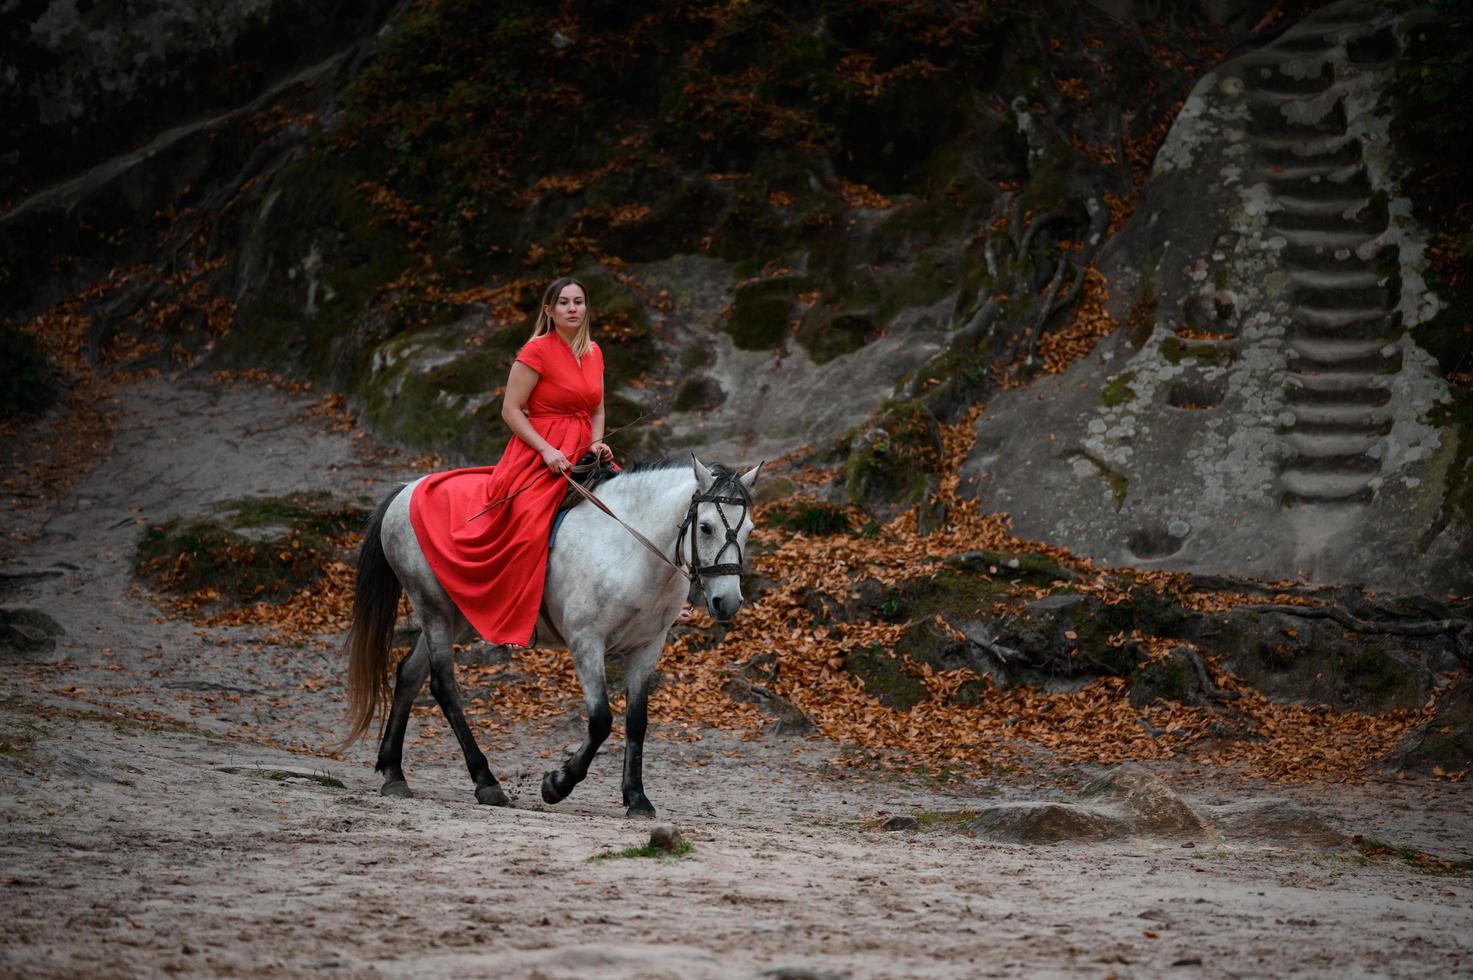 Dovbush rocks and horse riding, a woman riding a horse in a red dress with bare feet. photo